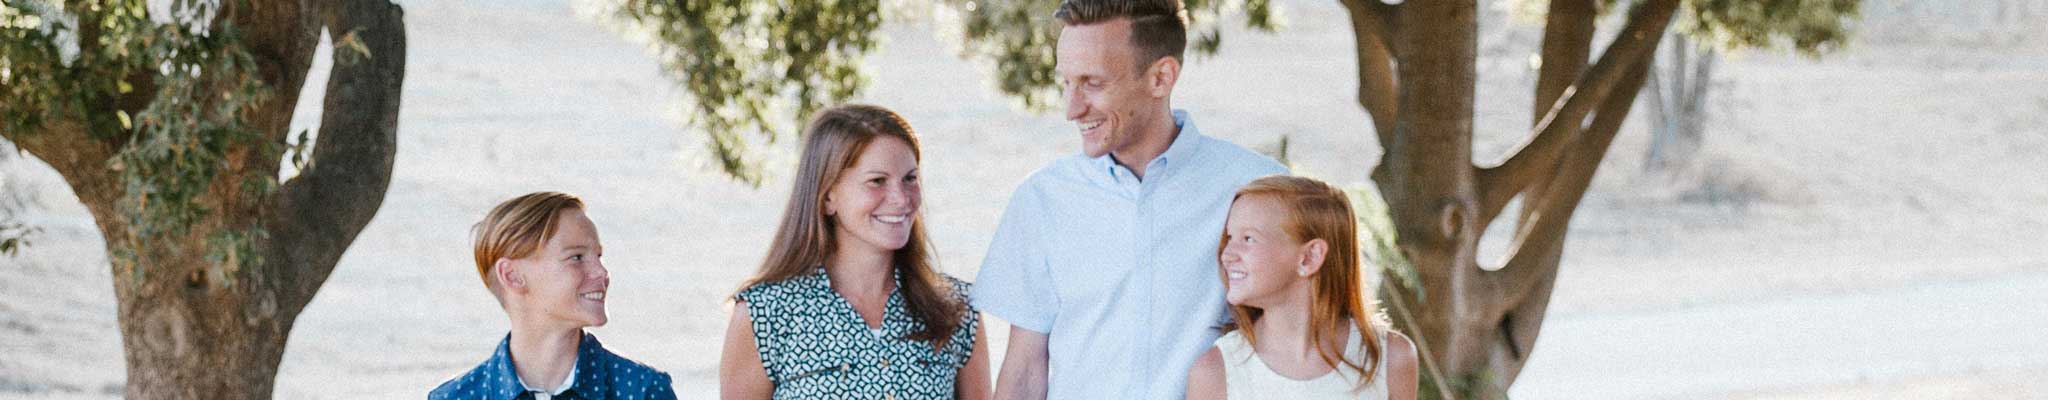 8 Practical Ways Loving Parents Put Their Marriage First